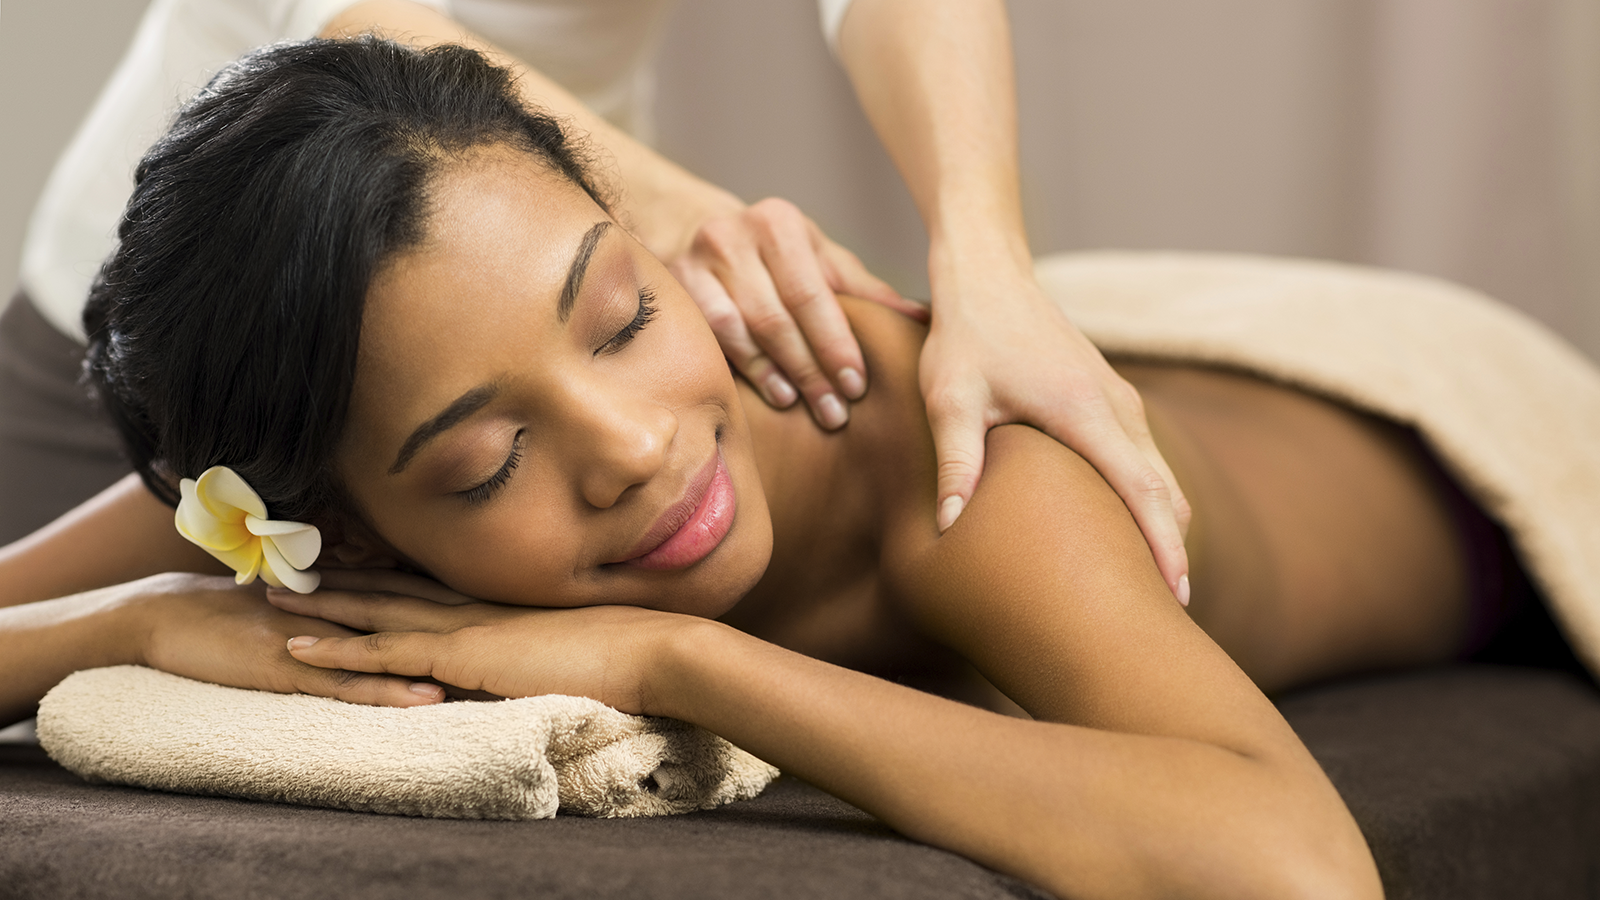 Add Massage to Your Routine For Alleviating Pain